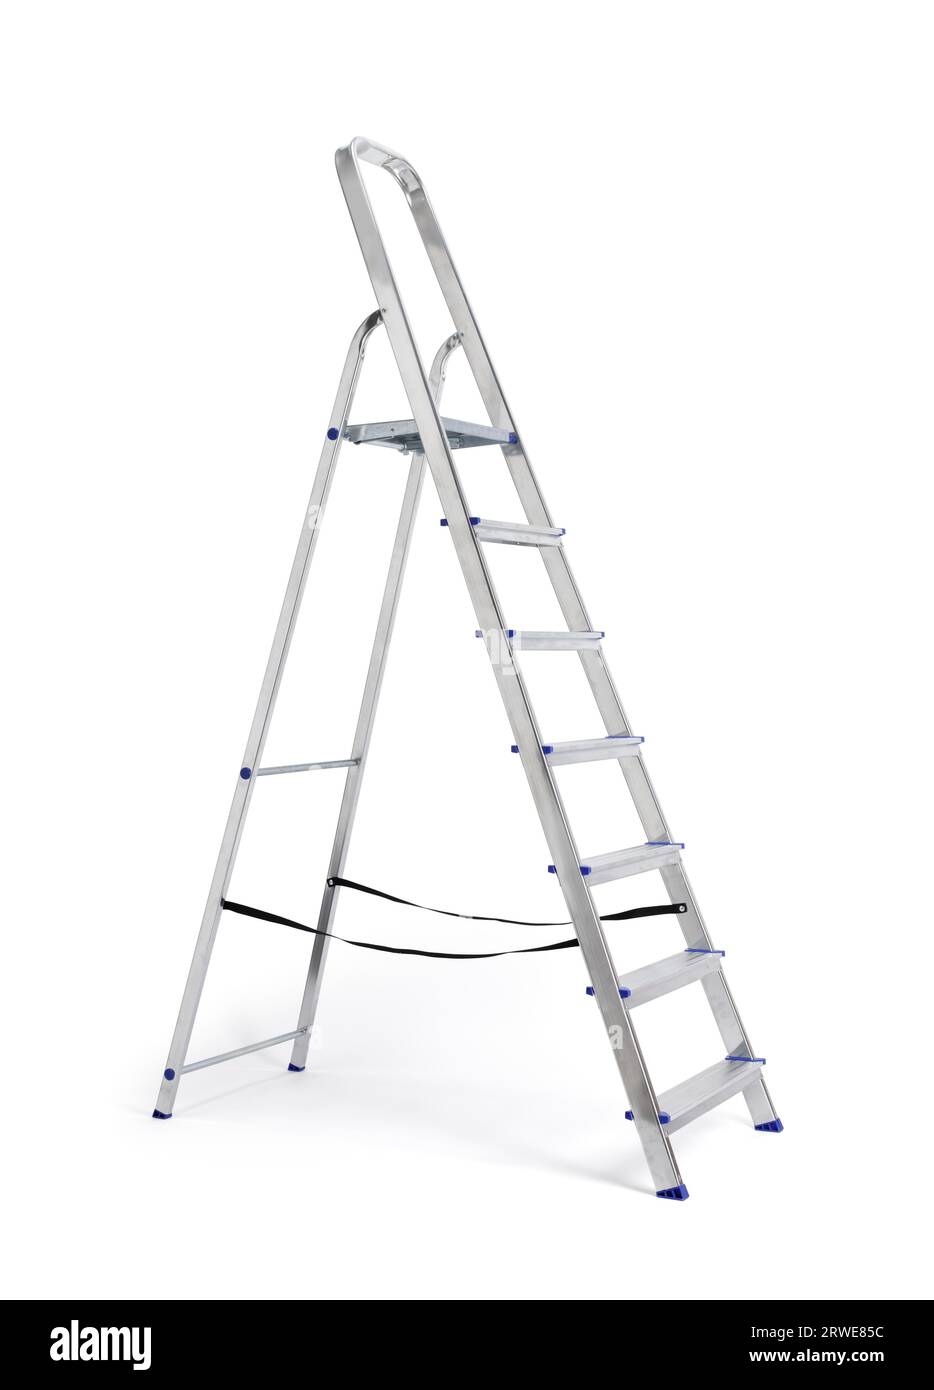 A new metallic step ladder isolated on white with natural shadows Stock Photo